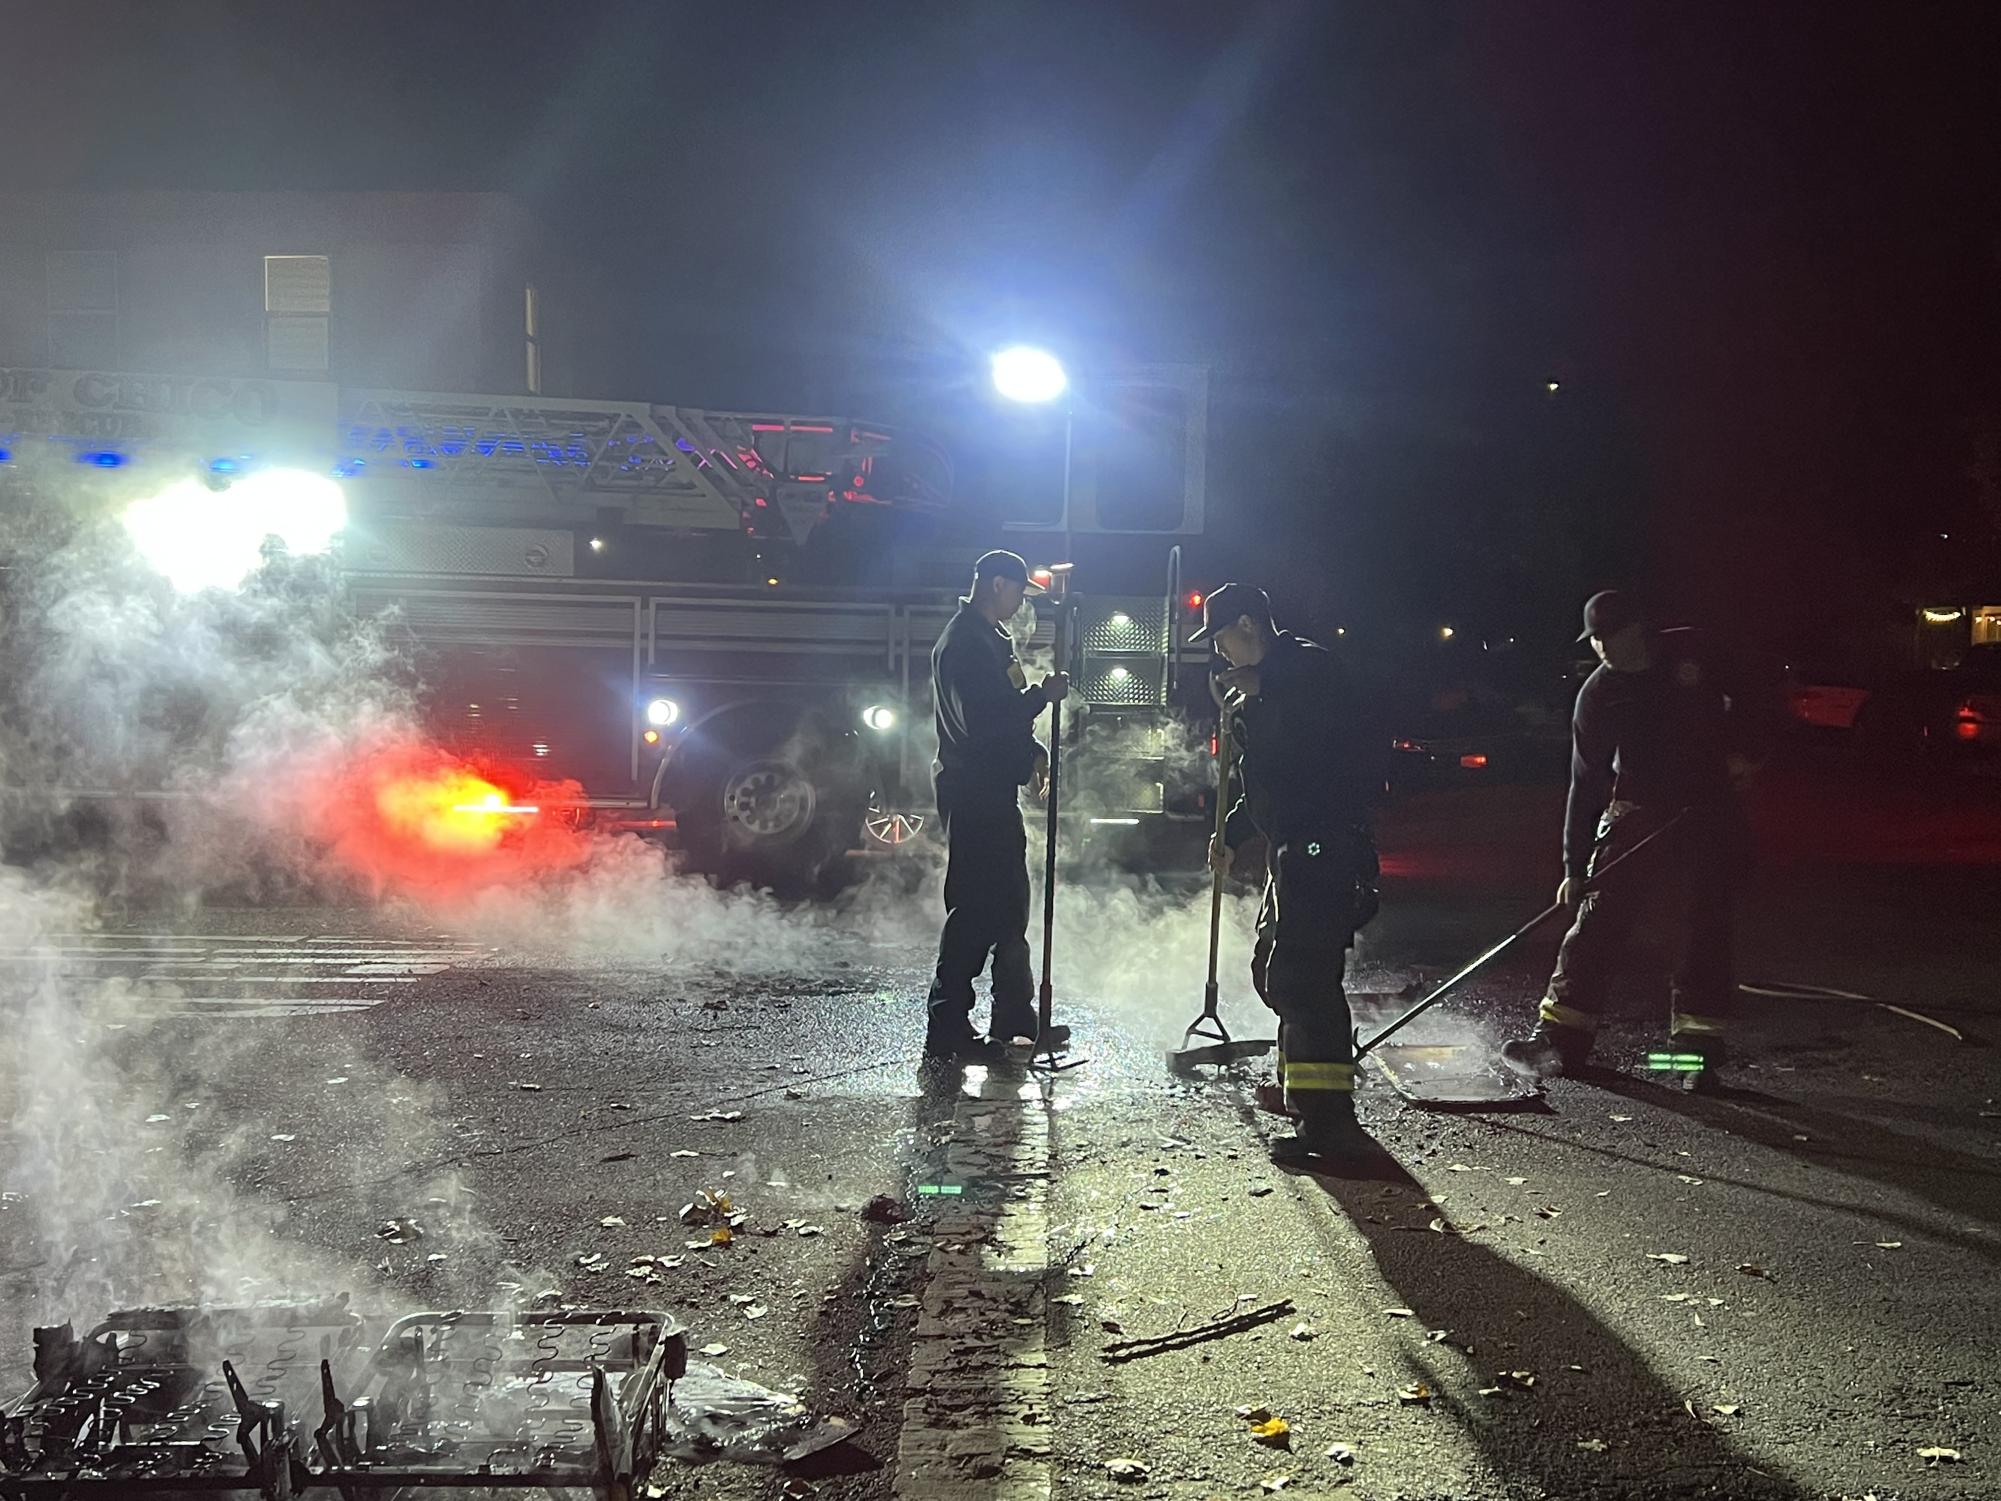 Three firemen rake the remains of a soggy couch fire. Photo taken Nov. 27 by Molly Myers.